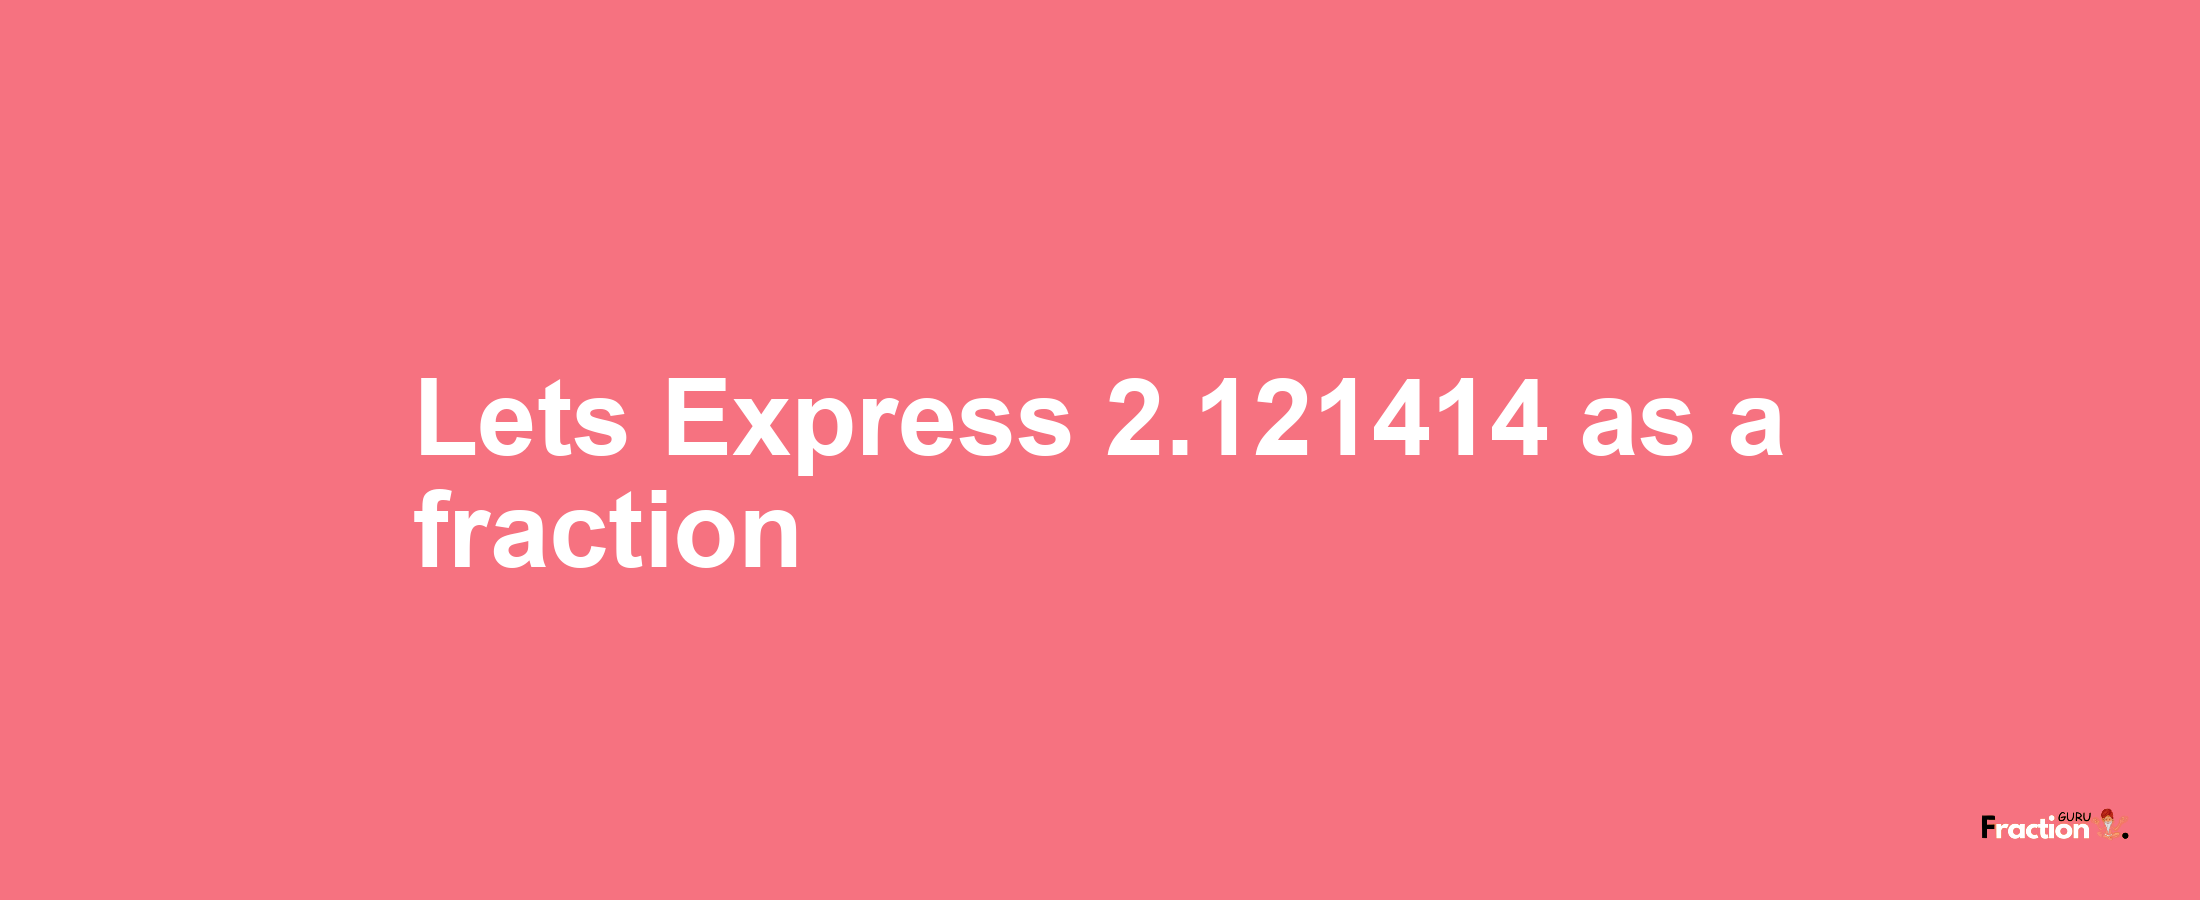 Lets Express 2.121414 as afraction